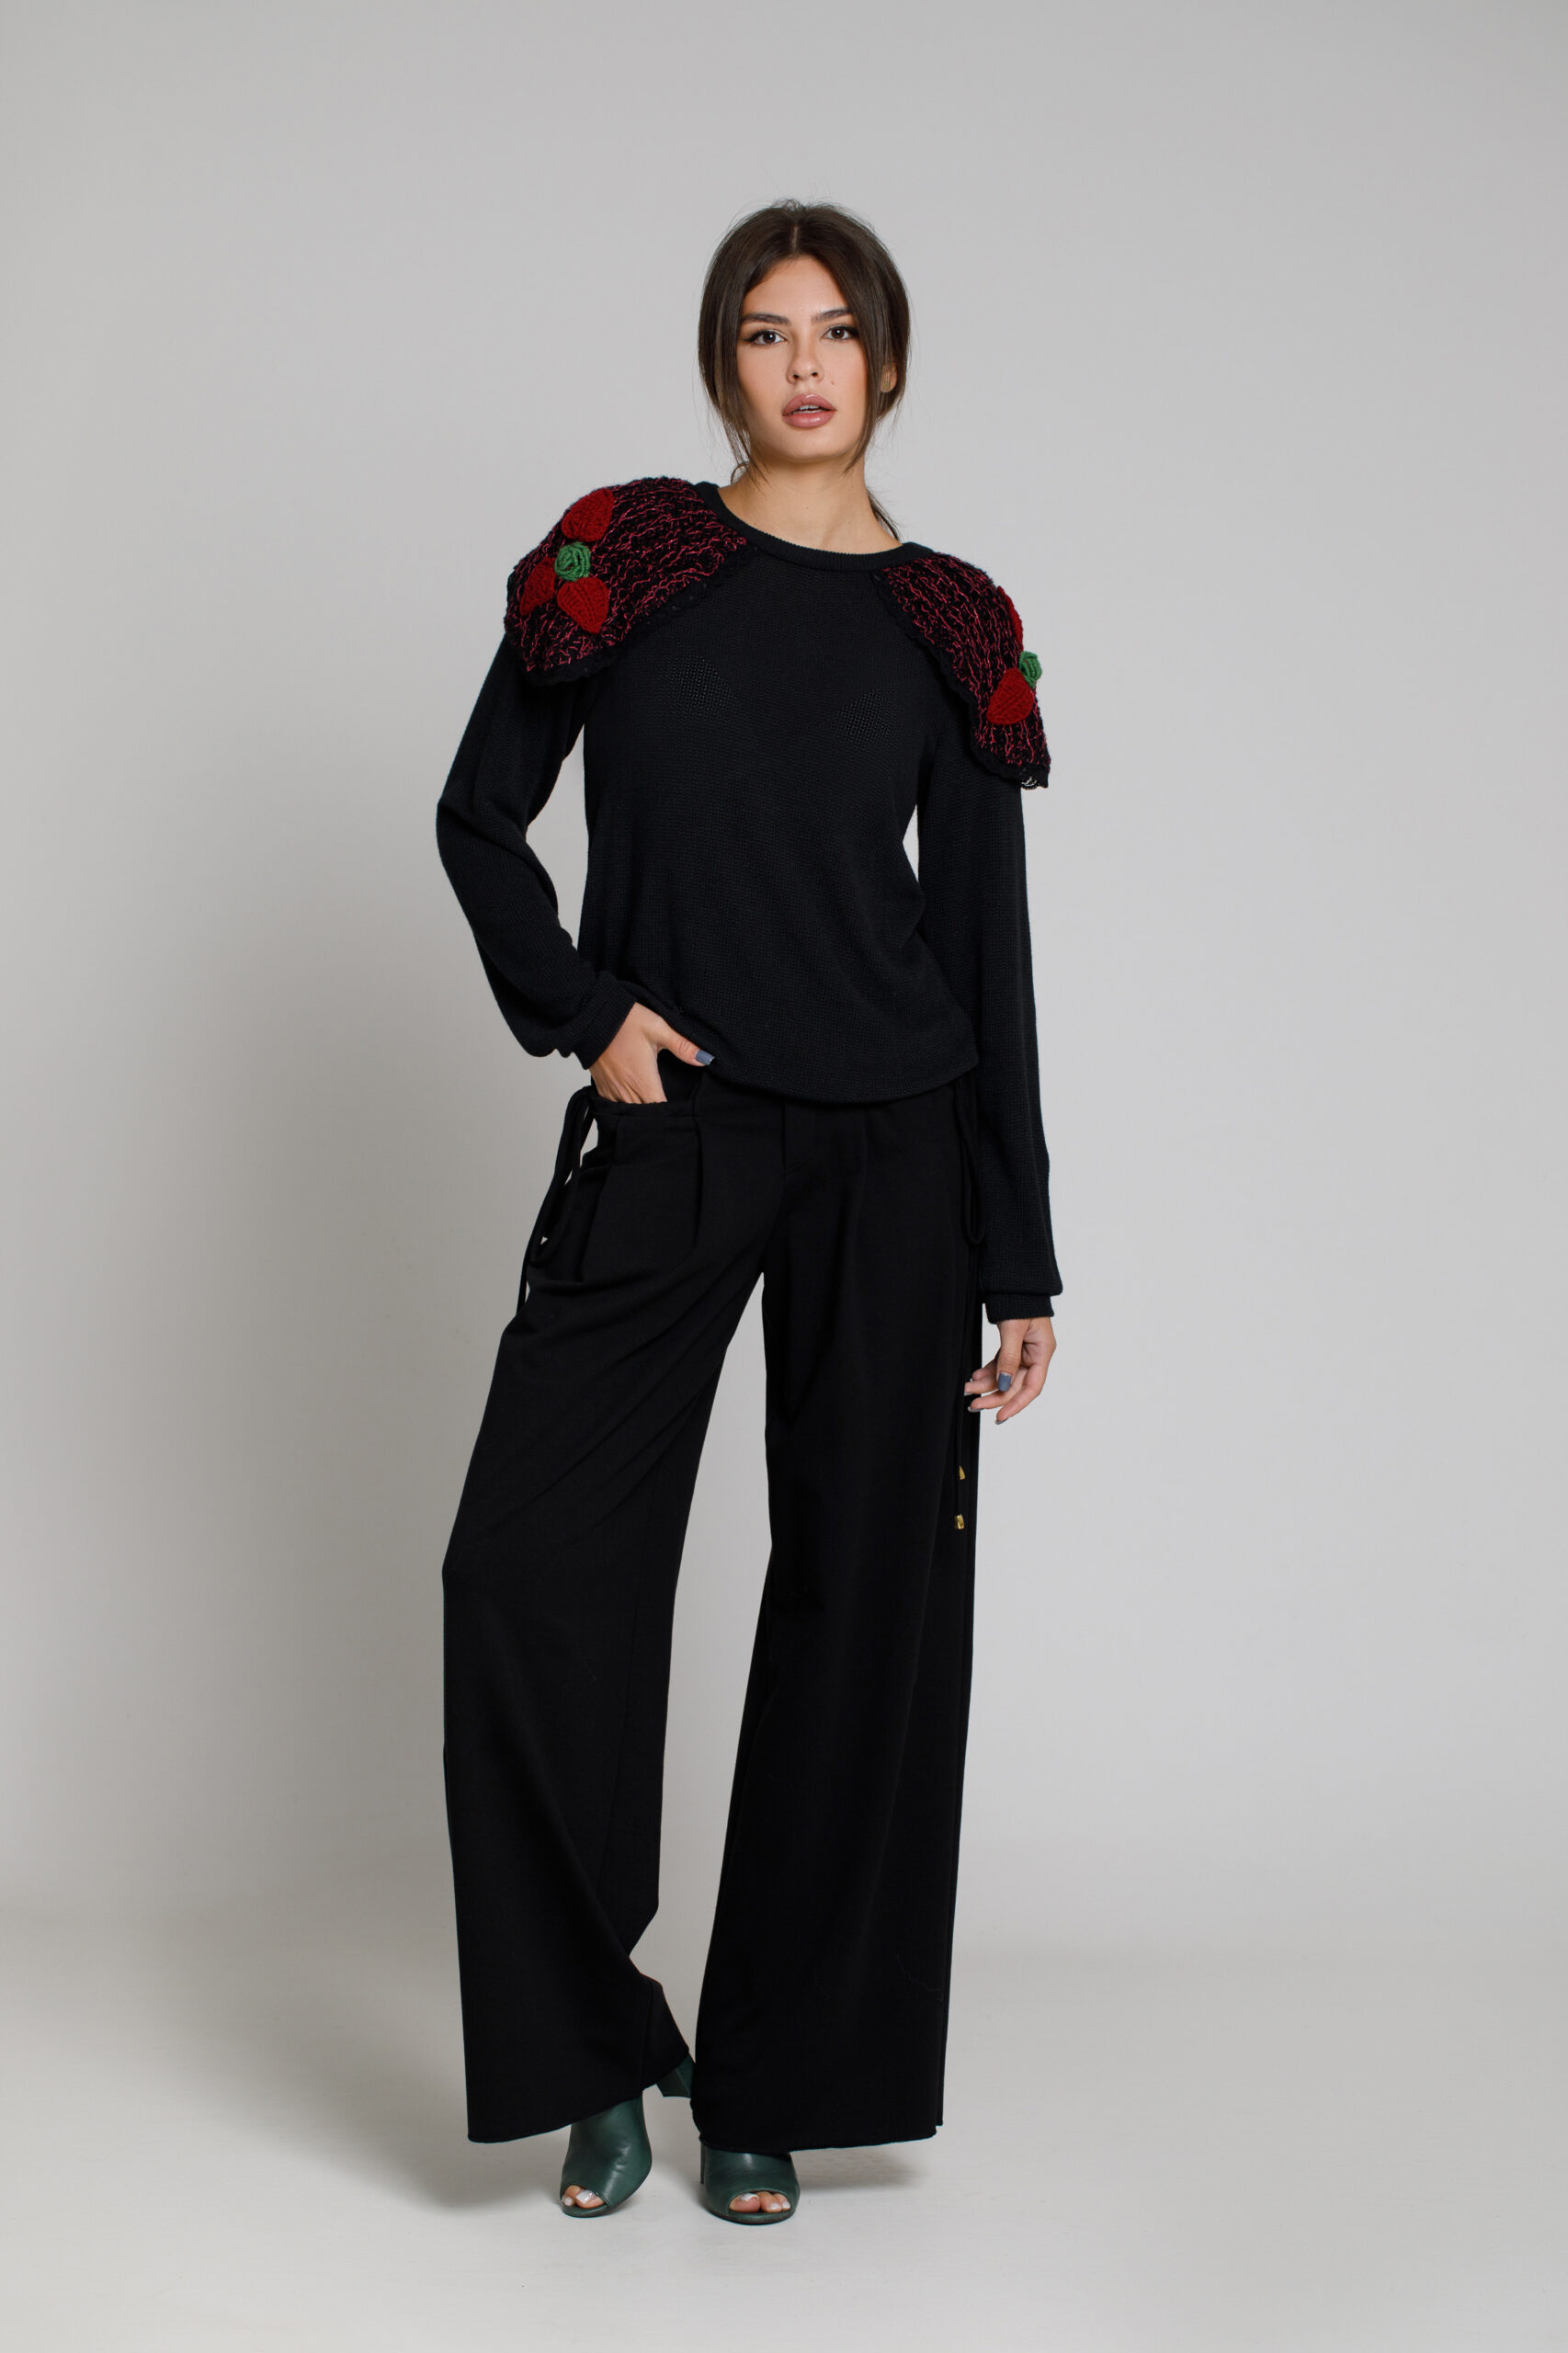 BONNIE Black trousers with clips. Natural fabrics, original design, handmade embroidery